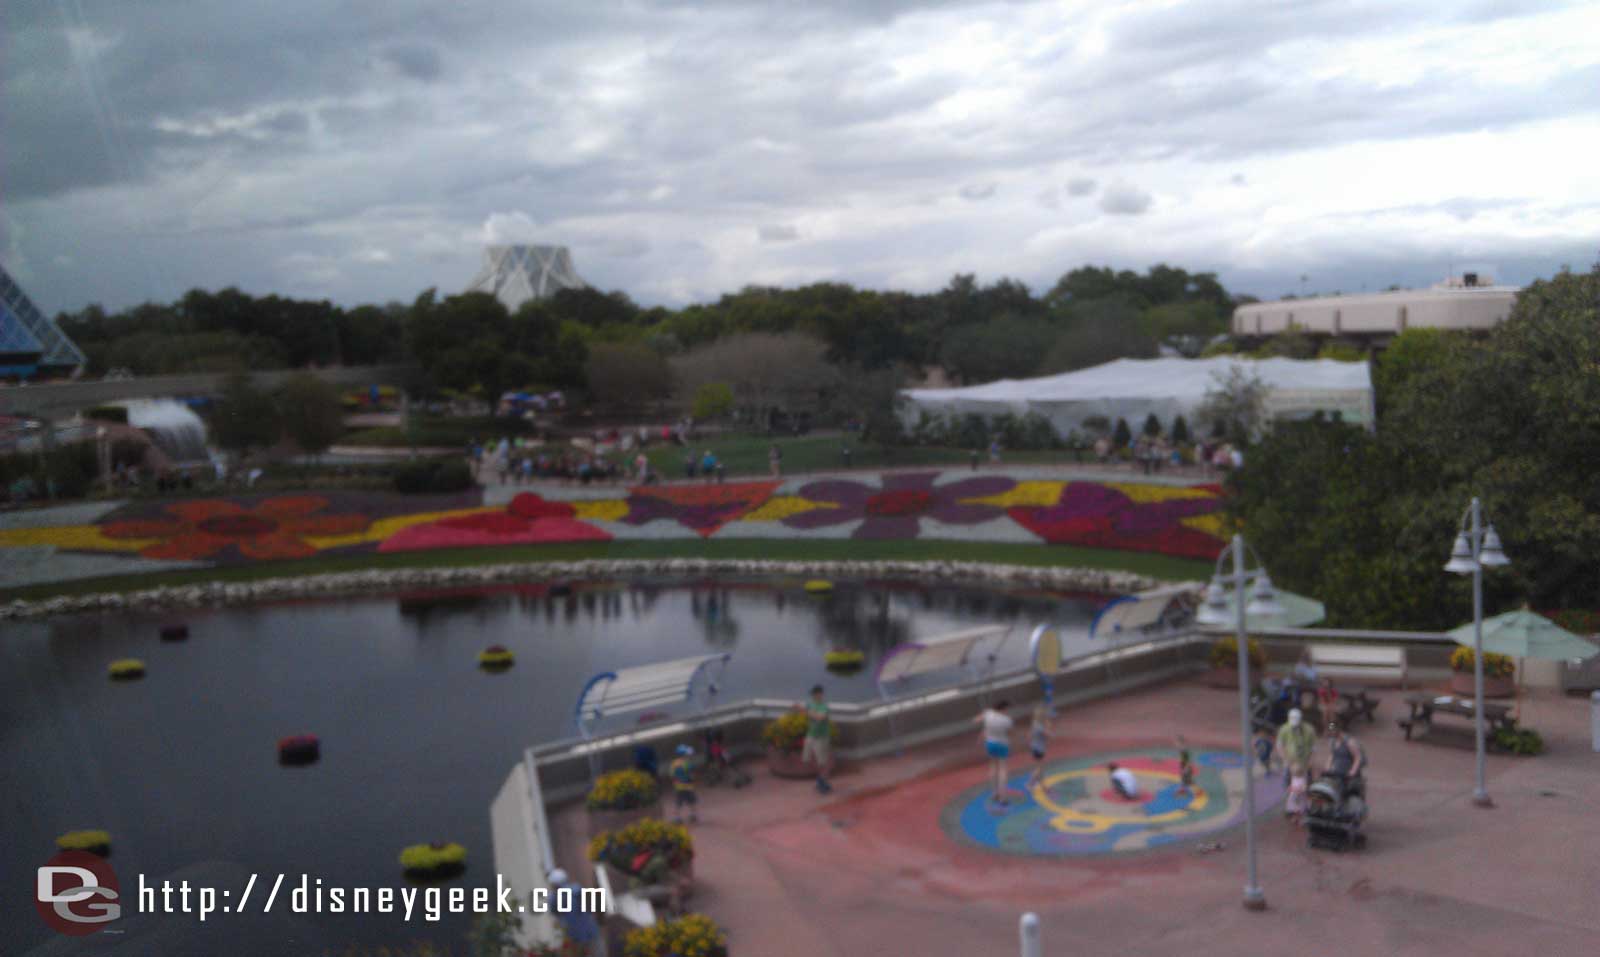 More Epcot flower beds from the Monorail